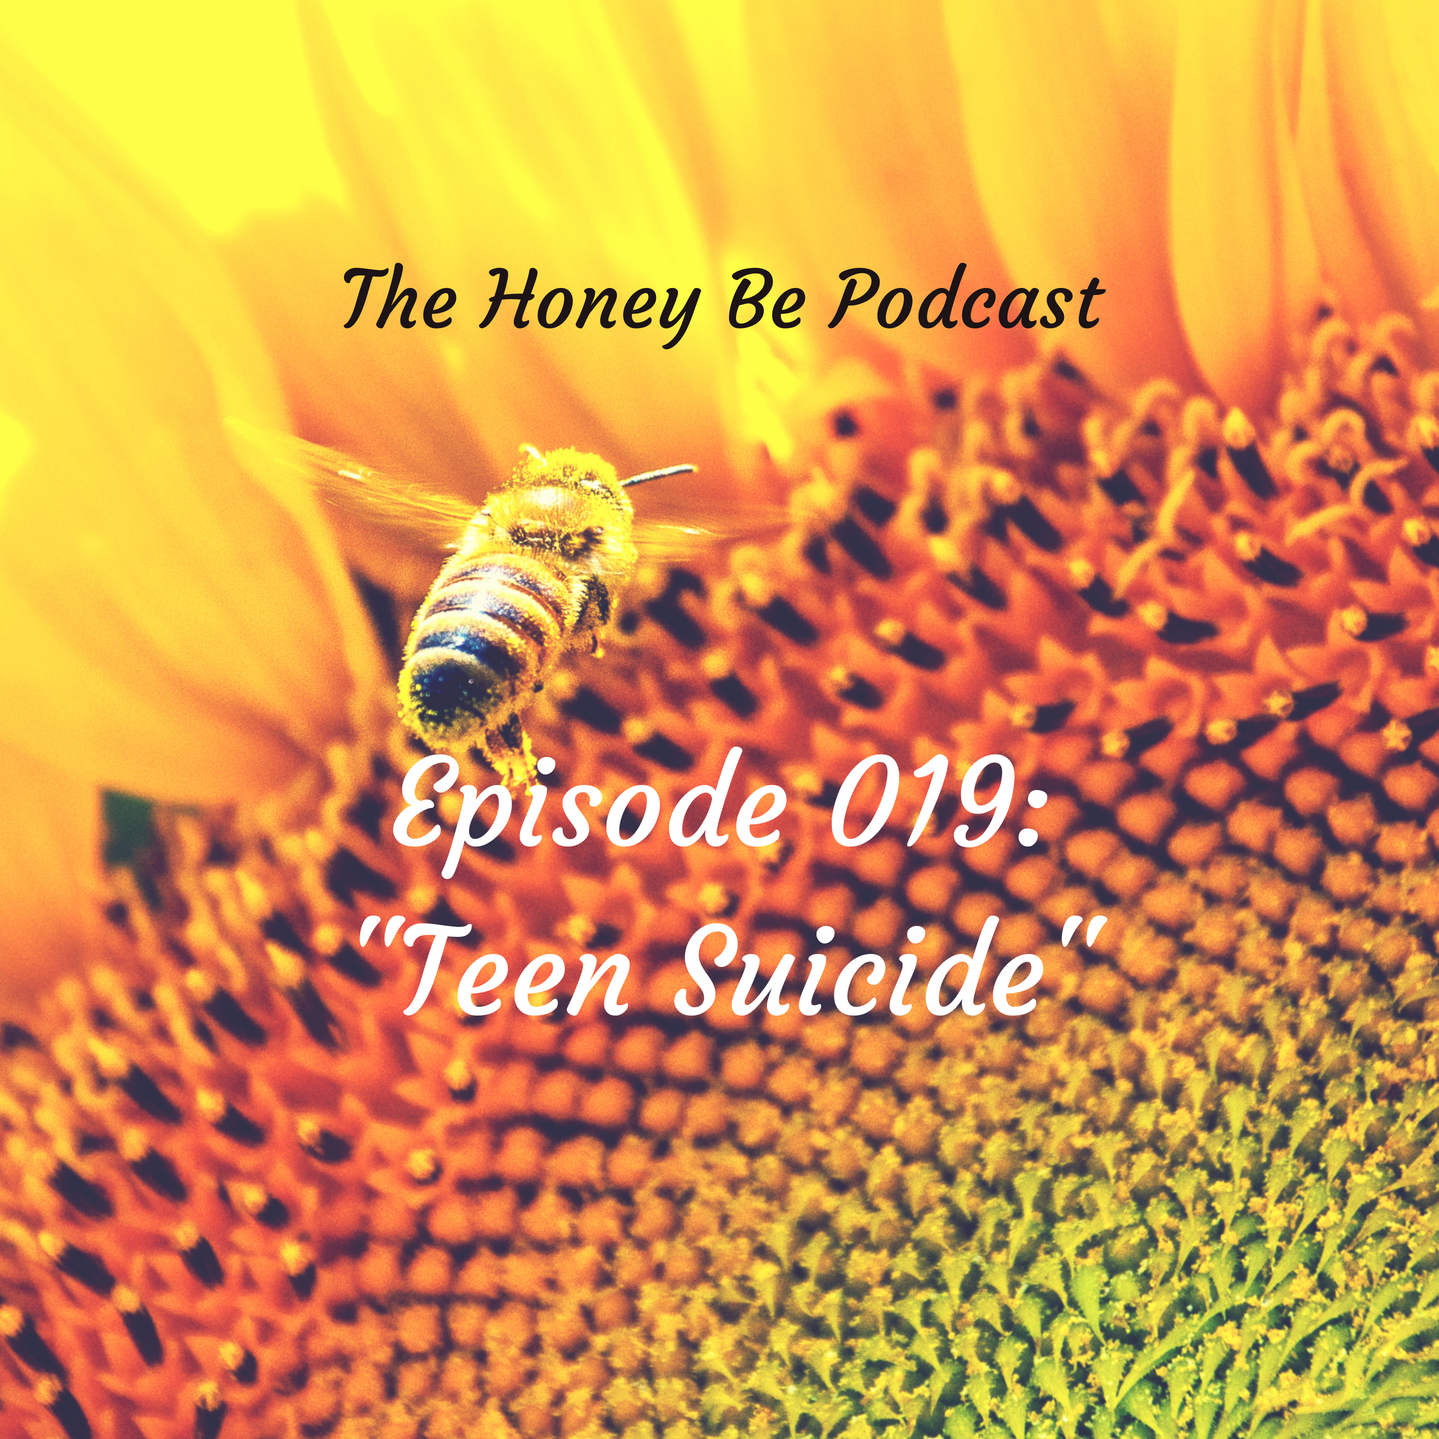 The Honey Be Podcast – Episode 019: “Teen Suicide”